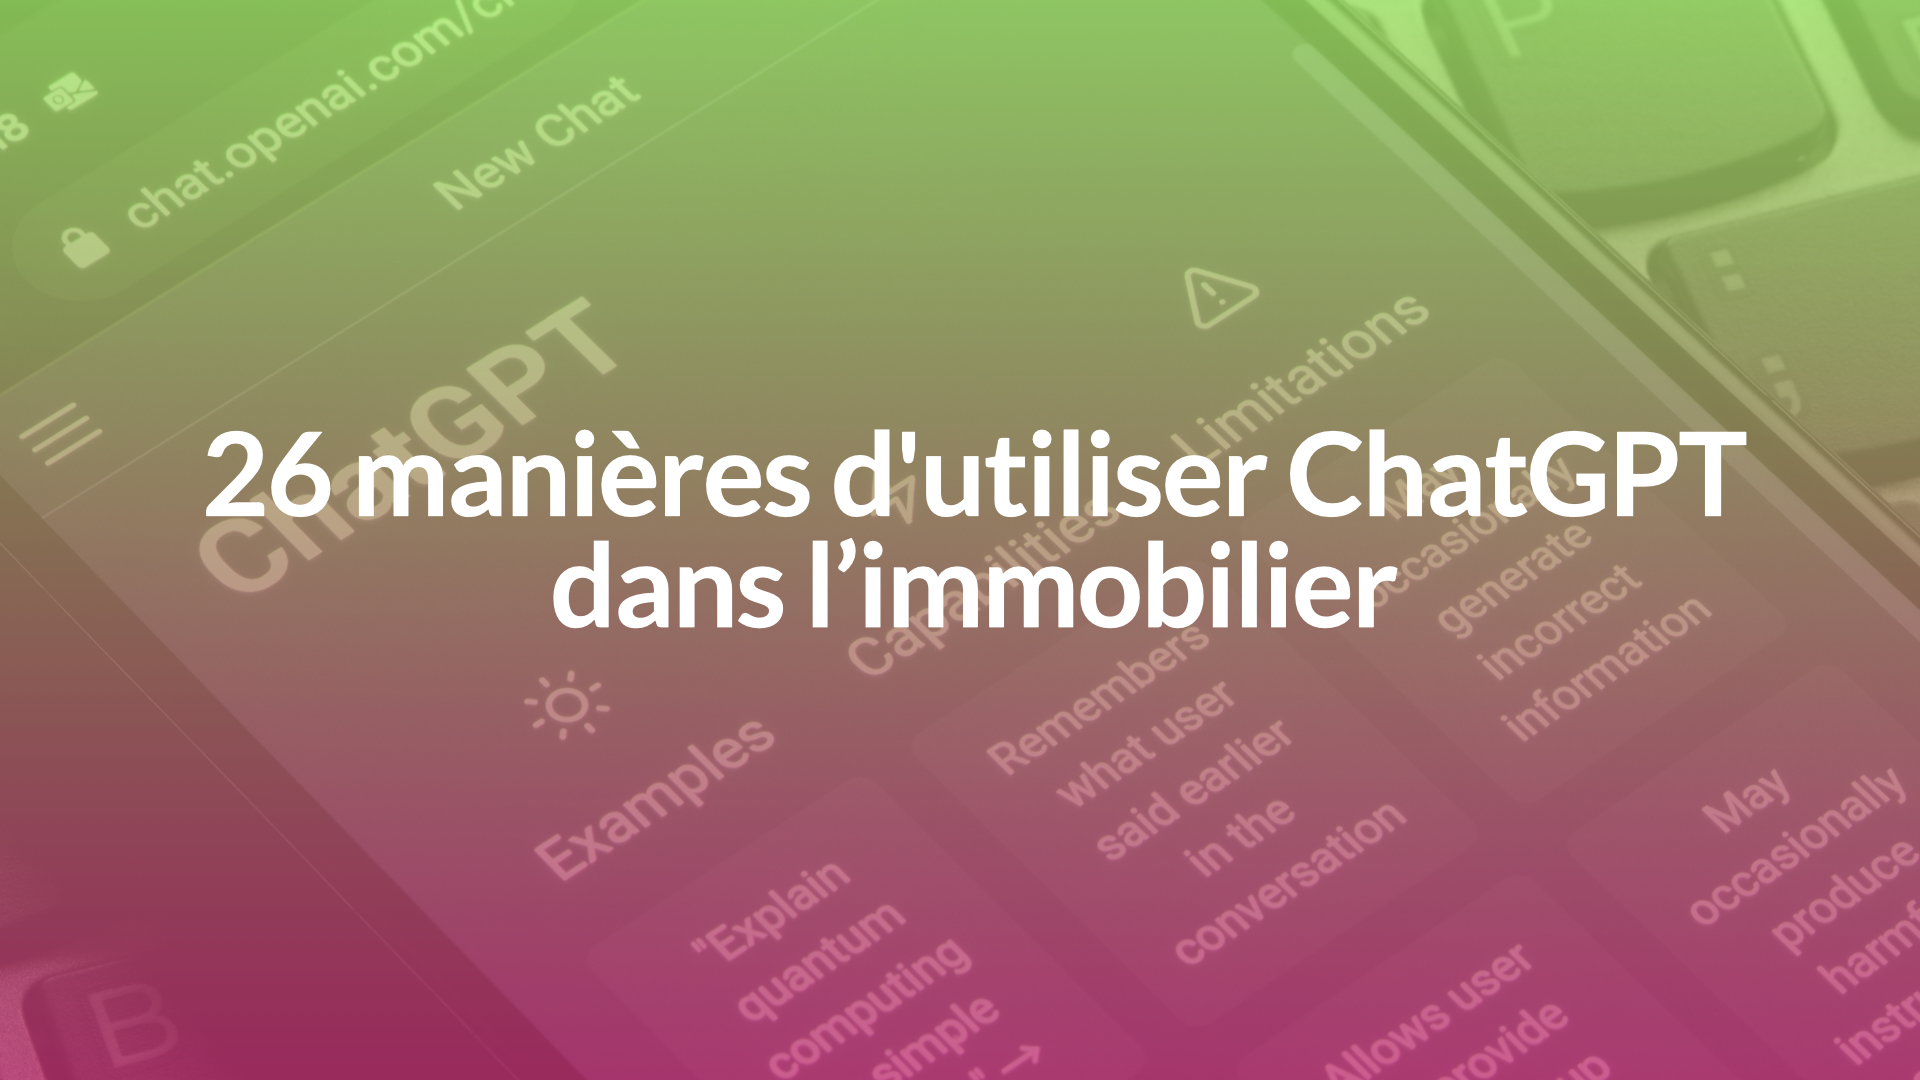 Chatgpt Immobilier.001